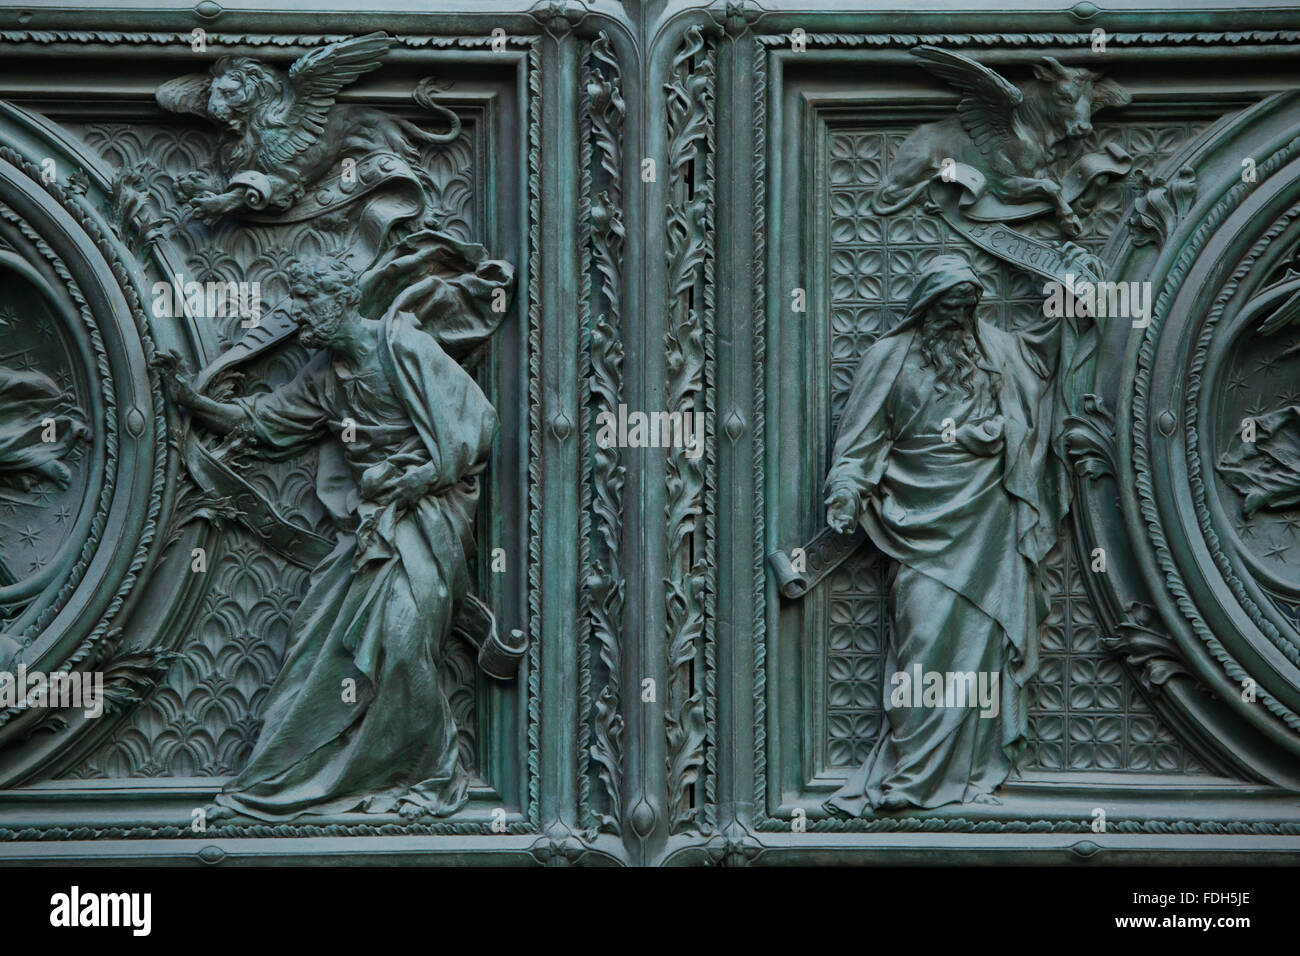 Evangelists Saint Mark and Saint Luke. Detail of the main bronze door of the Milan Cathedral (Duomo di Milano) in Milan, Italy. Stock Photo